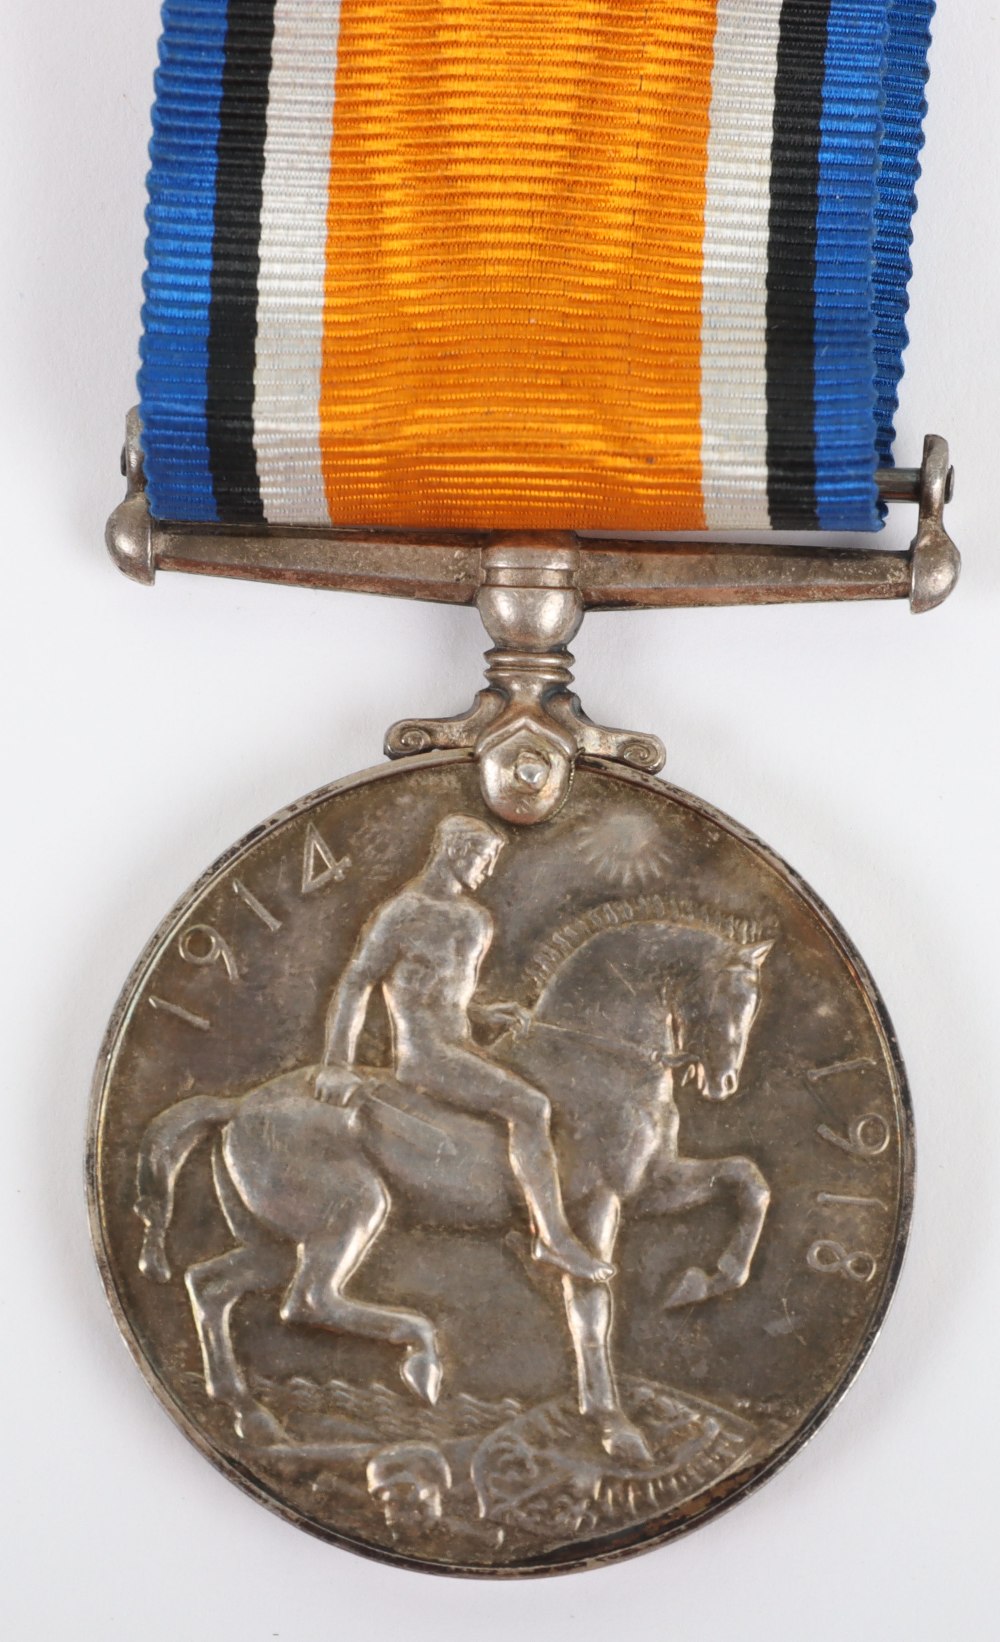 WW1 Single British War Medal Full Entitlement for Service with the Royal Naval Air Service